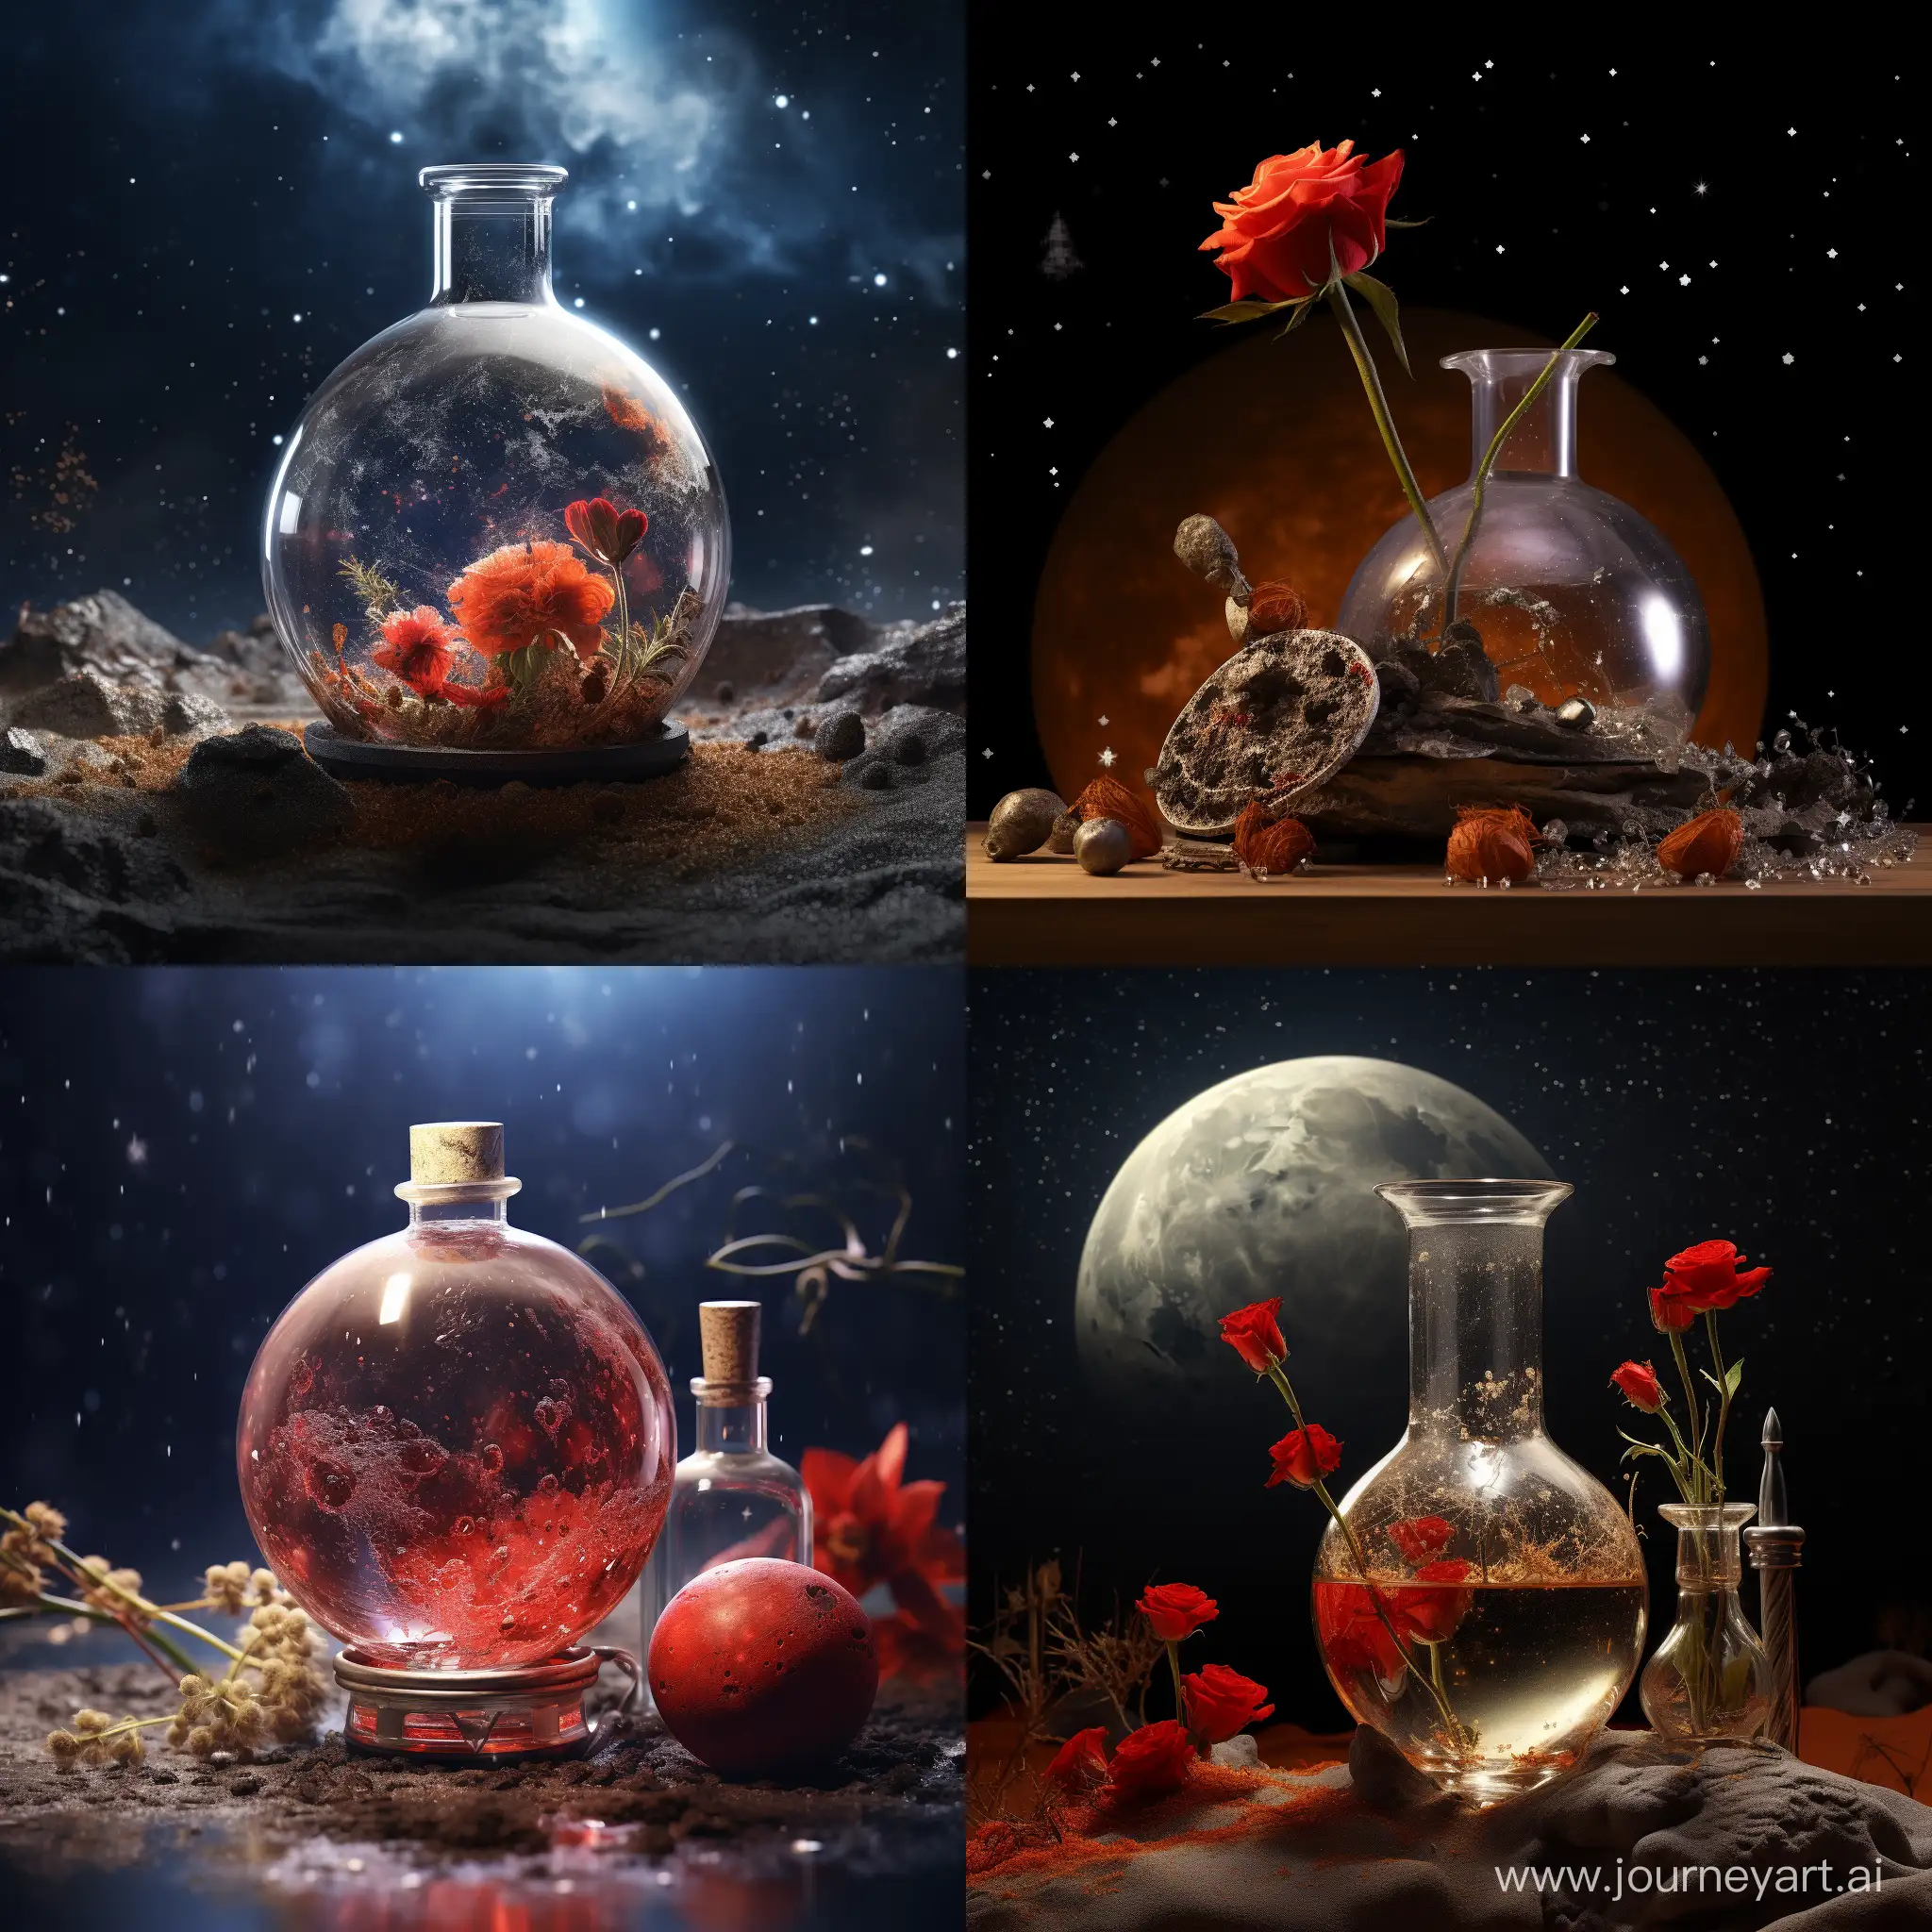 HyperRealistic-8K-Image-Moons-Surface-and-Red-Rose-in-Flask